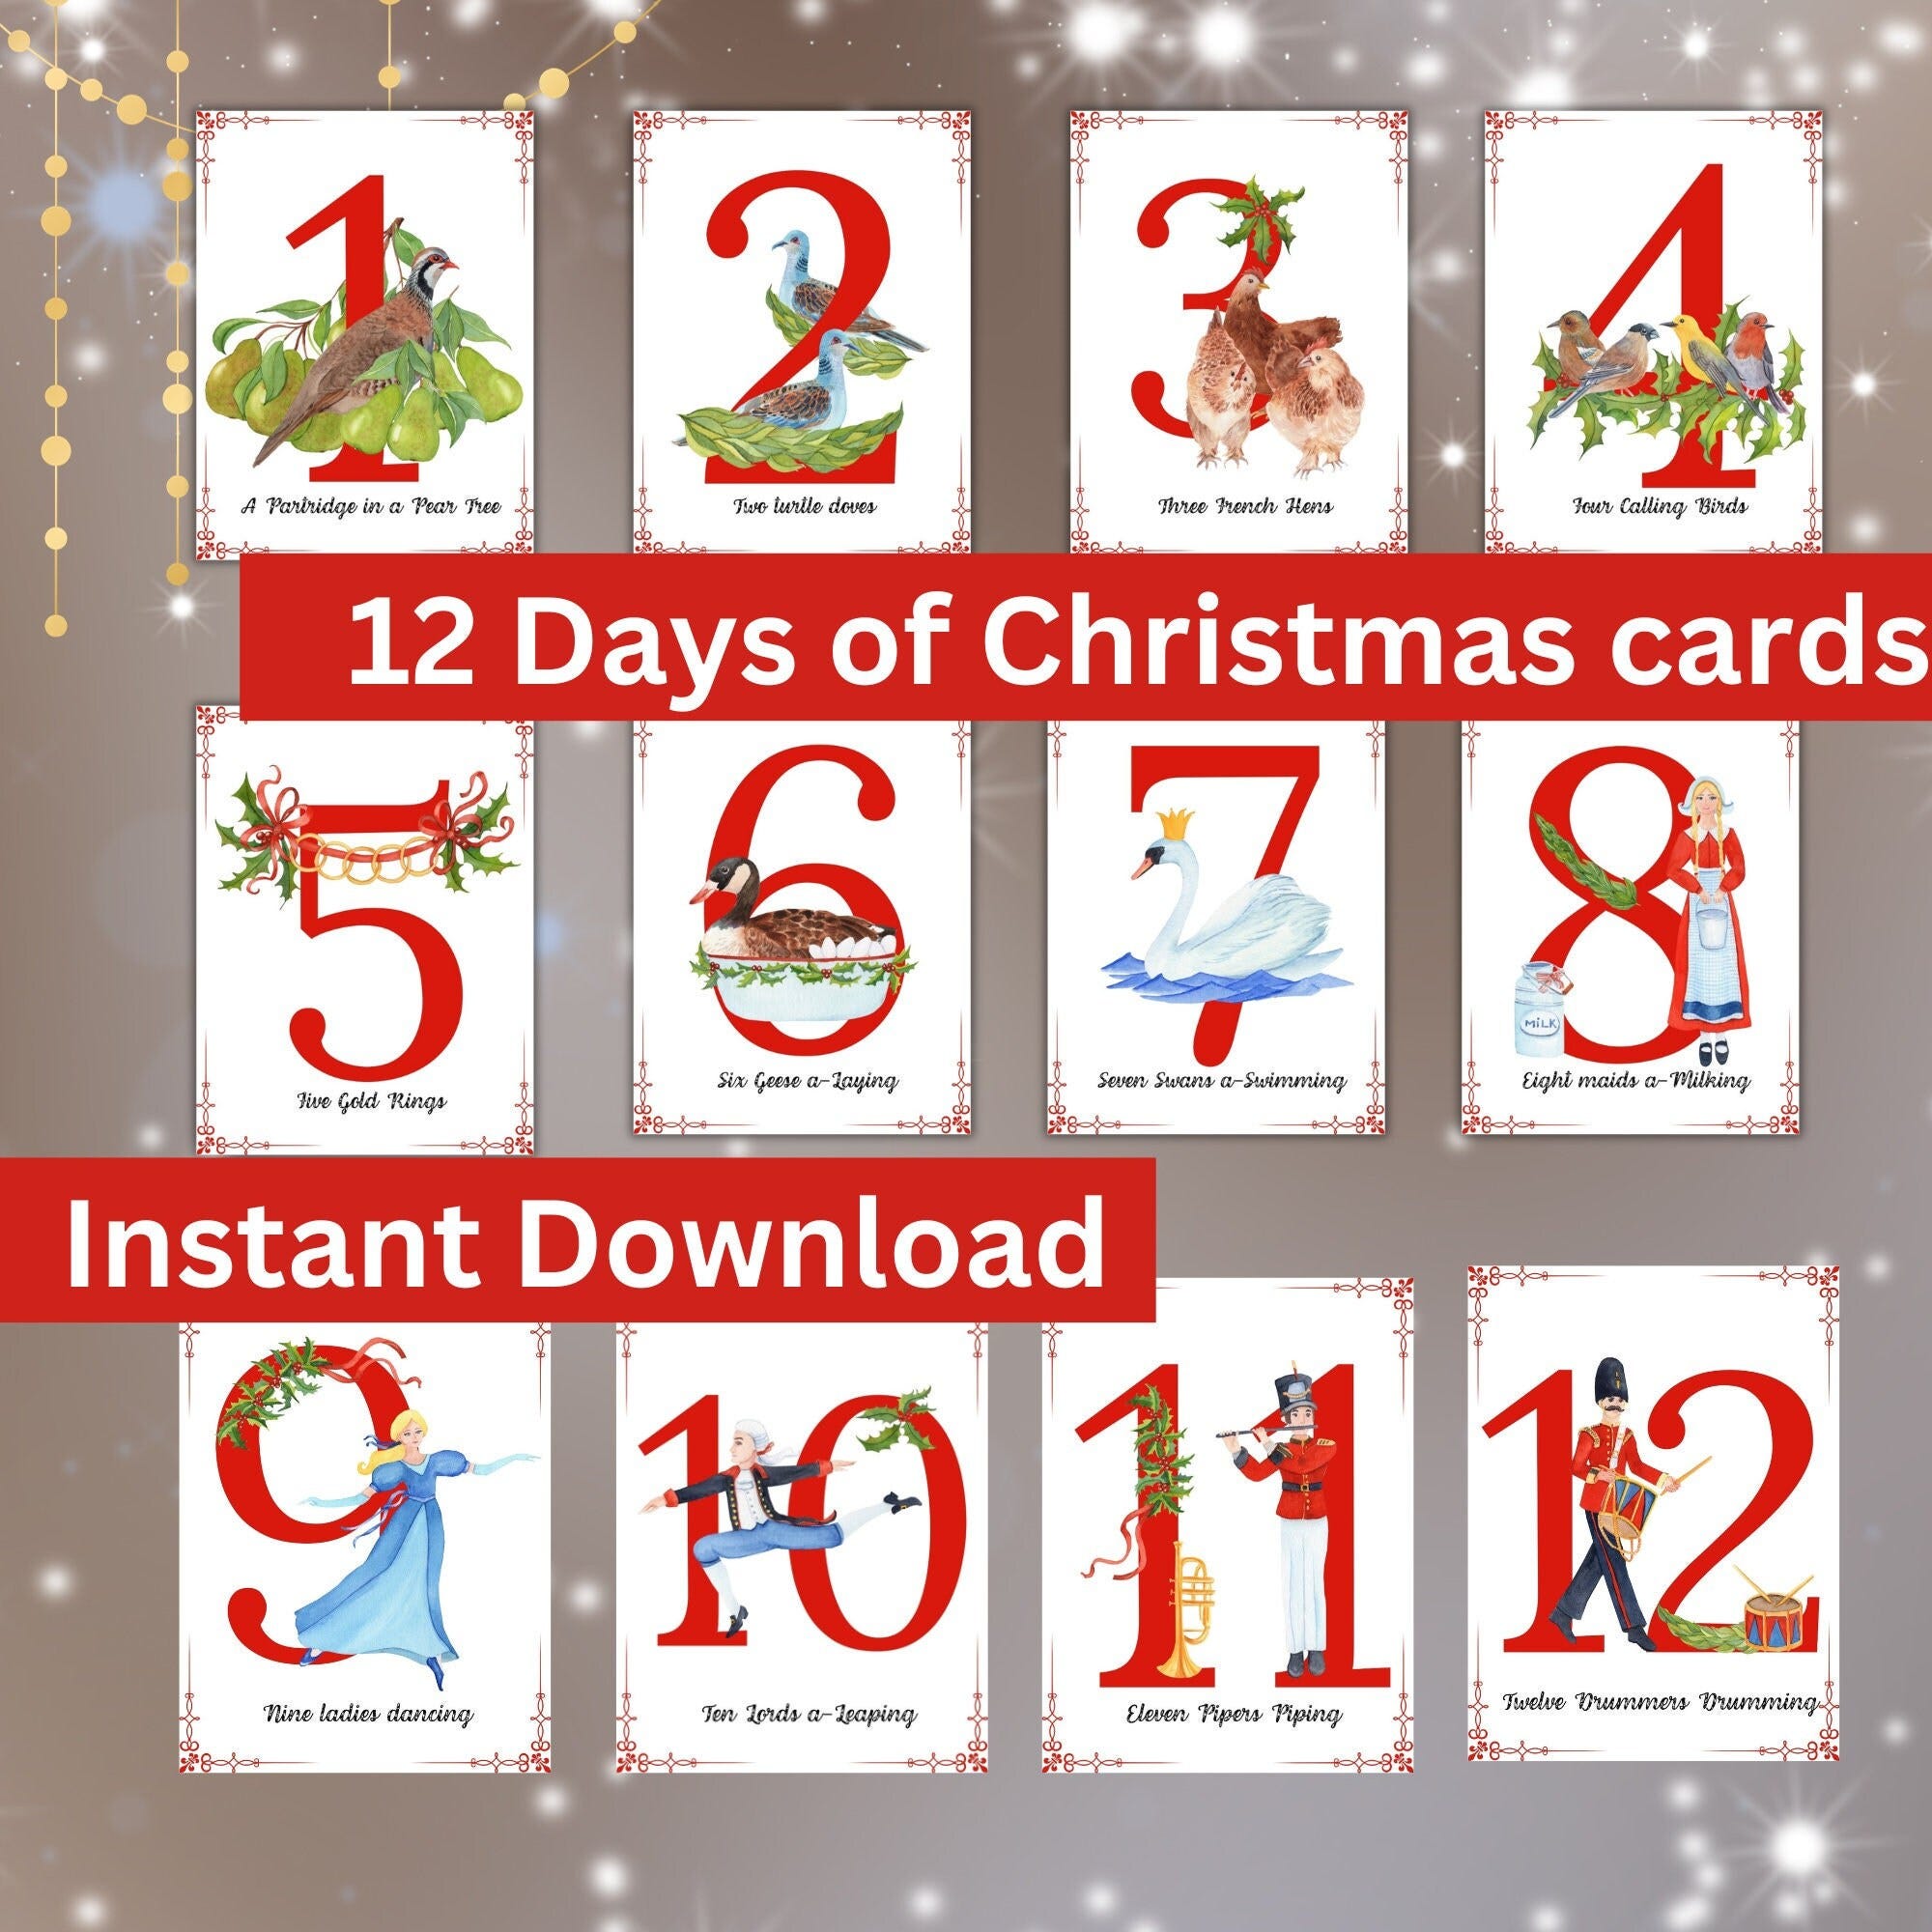 12 Days of Christmas Cards, Holiday Greeting Cards, Twelve Days of Christmas Greeting Cards